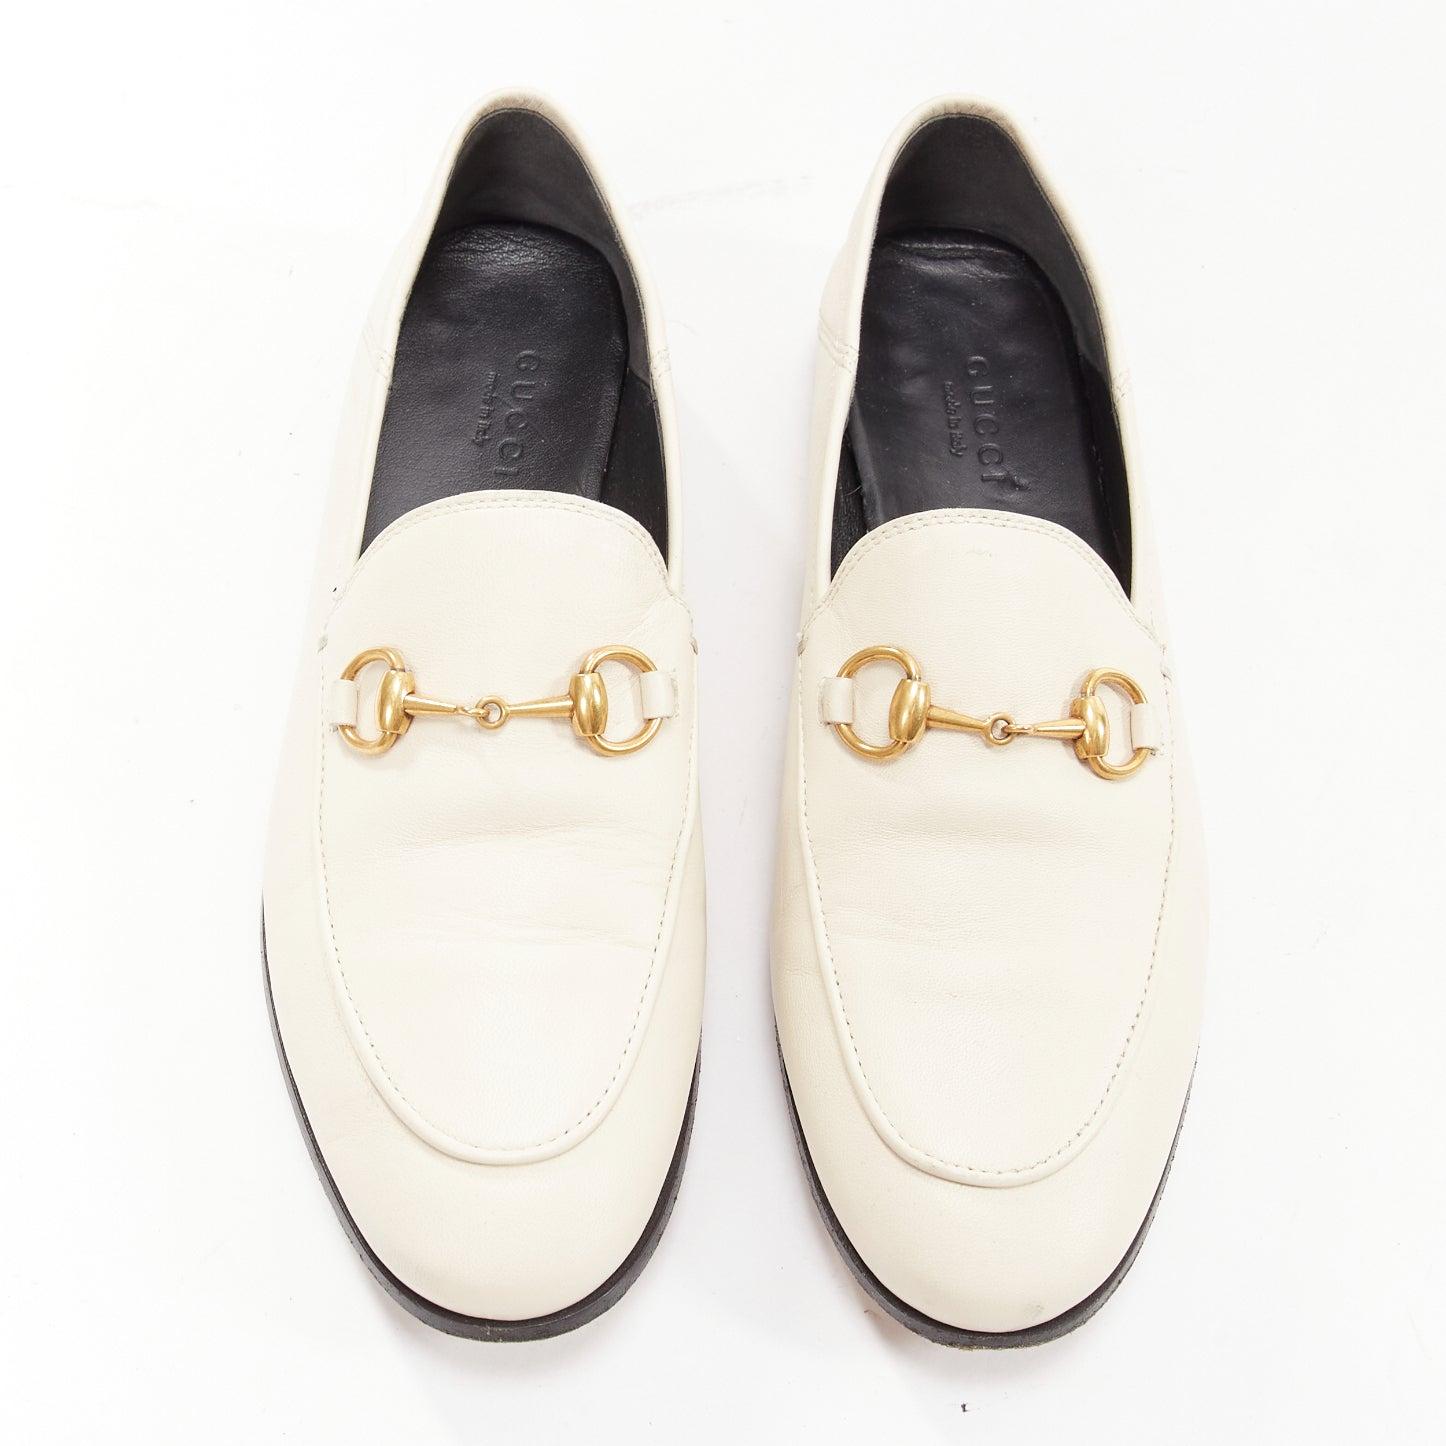 GUCCI Brixton Horsebit cream gold buckles convertible slippers loafers EU35
Reference: YIKK/A00044
Brand: Gucci
Designer: Alessandro Michele
Model: Brixton
Material: Leather
Color: Cream, Gold
Pattern: Solid
Closure: Slip On
Lining: Black